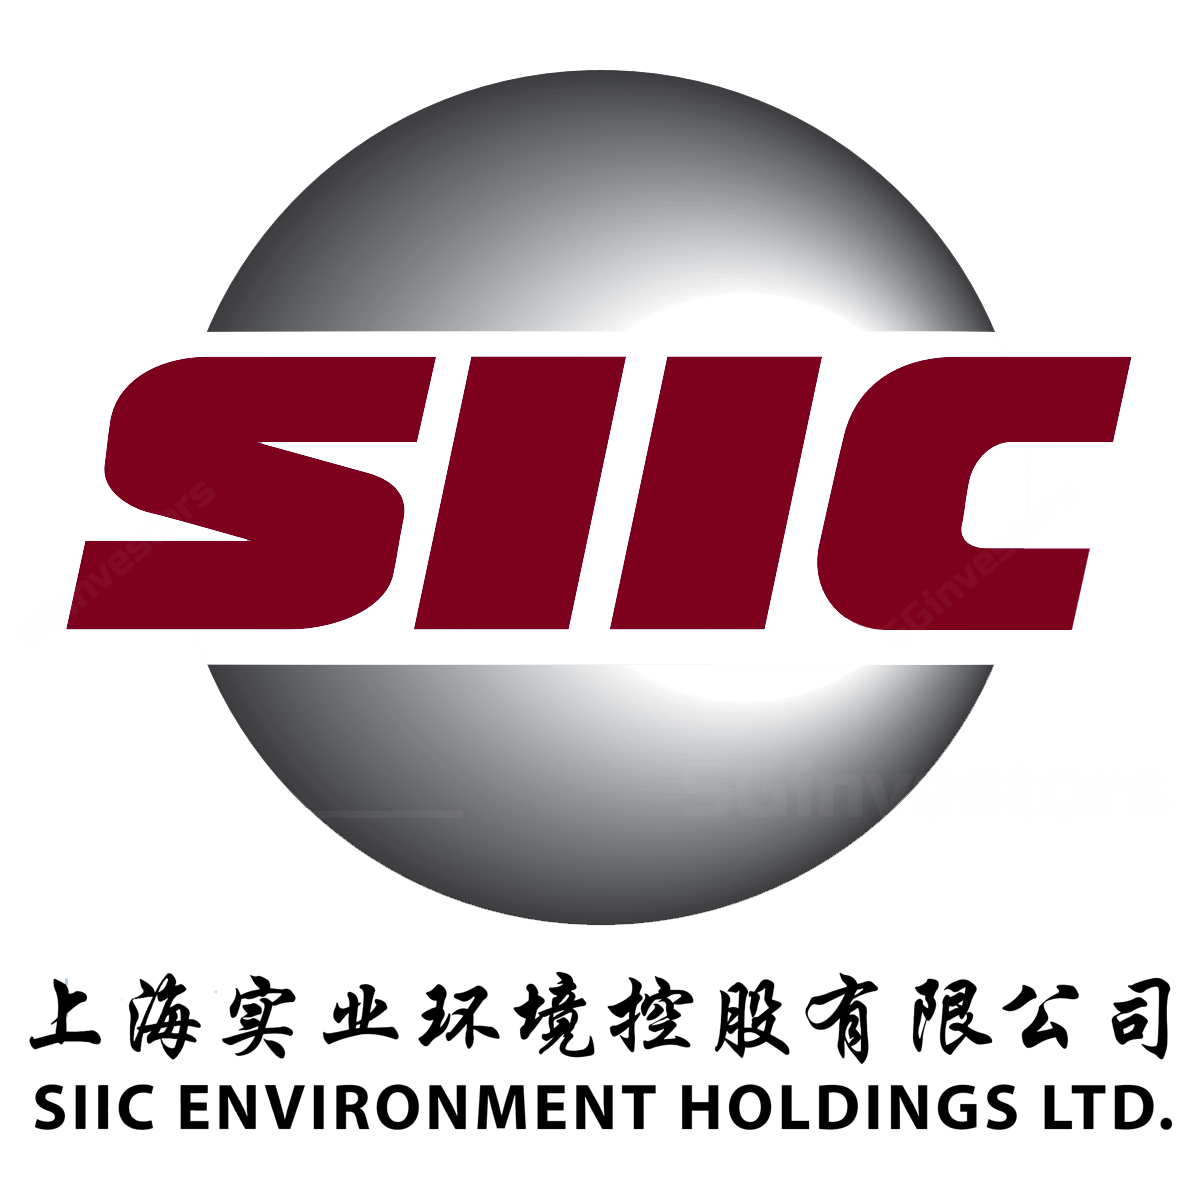 SIIC Environment (SIIC SP) - DBS Vickers 2017-08-15: Too Conservative On The PPP Market